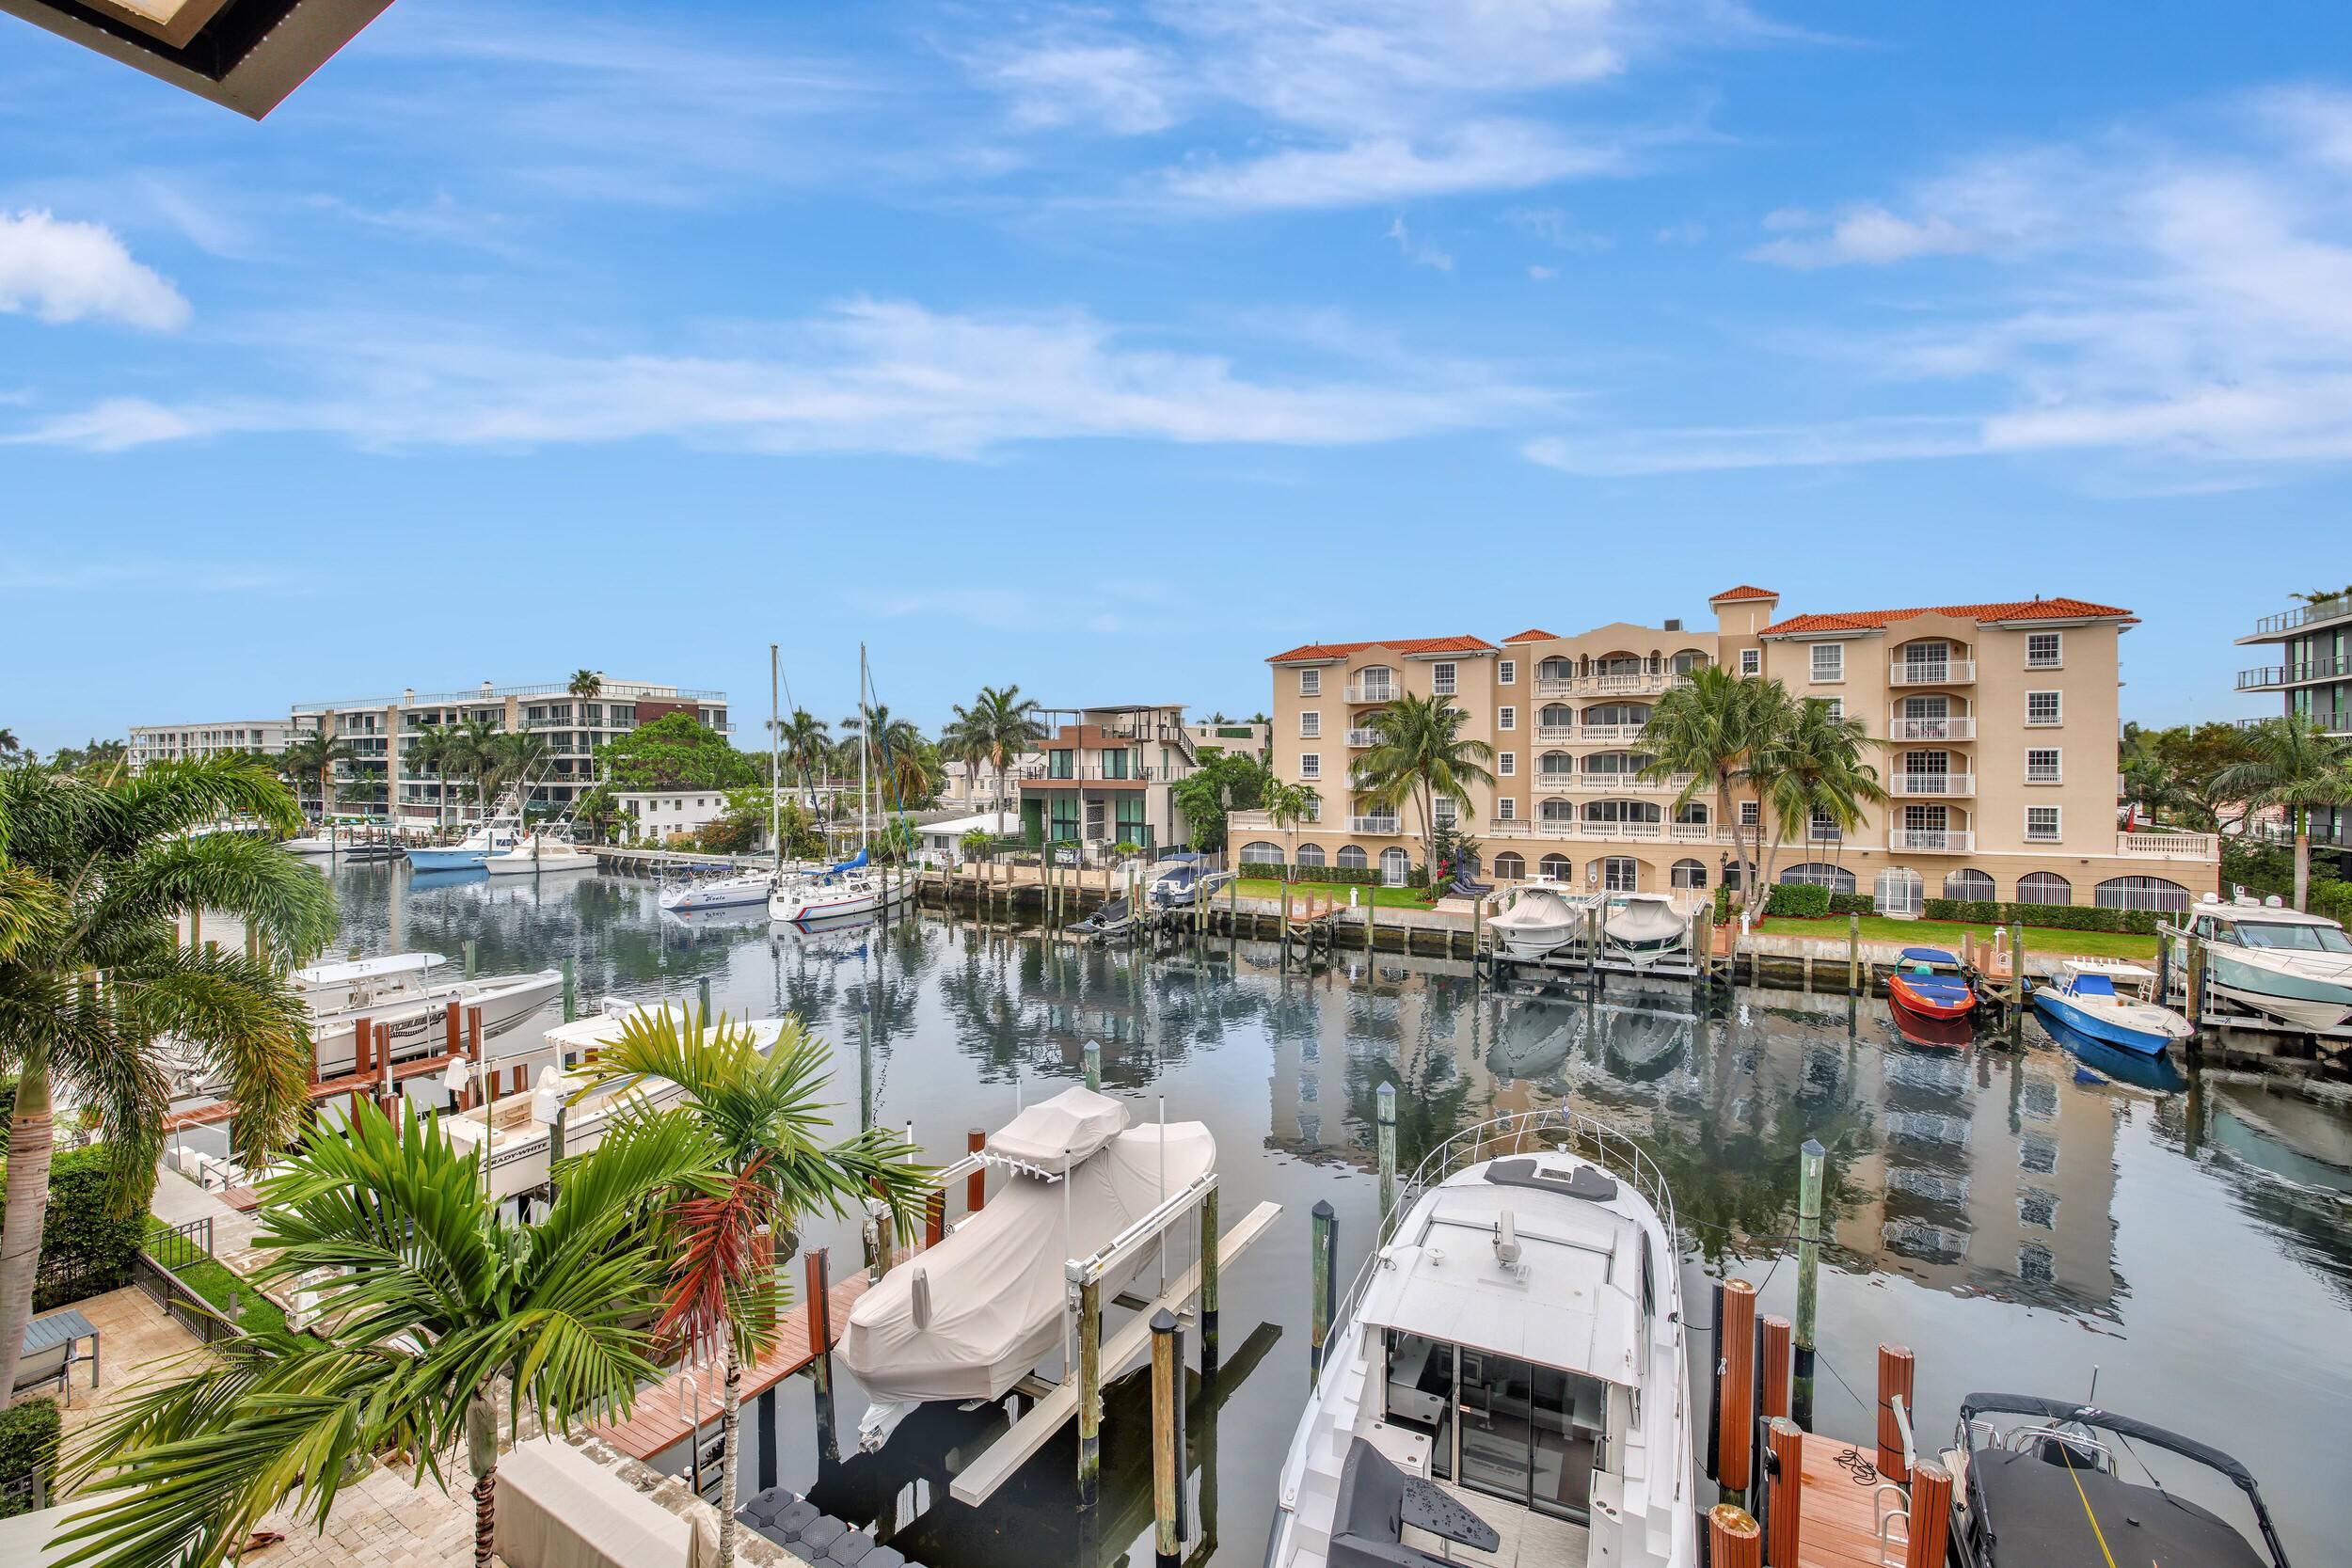 If you are looking for a beautifully furnished and spacious remodeled waterfront 4 bdrm, 41 2 bth townhome w elevator located on Isle of Venice in Ft.